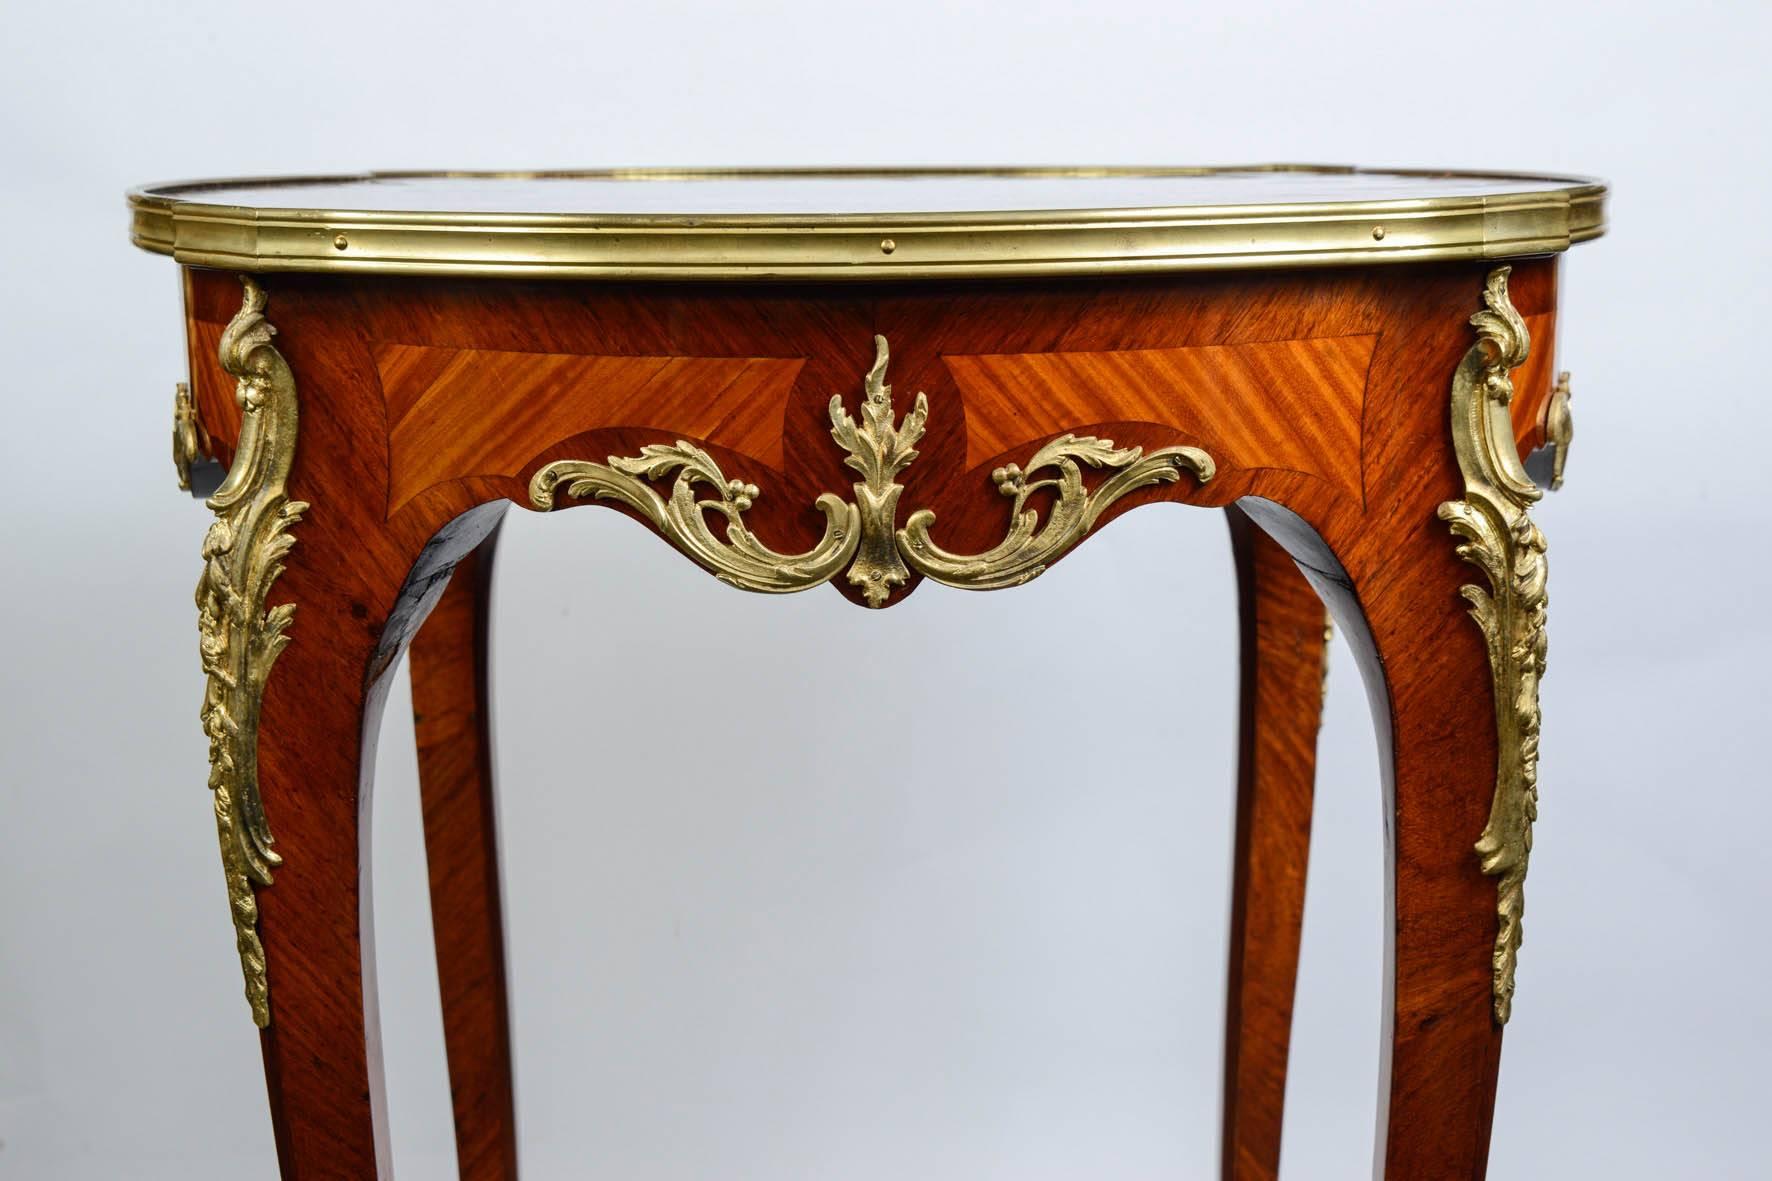 Round Gueridon in the Louis XV style, marquetry if diverse precious wood, decorated with gilded bronzes.